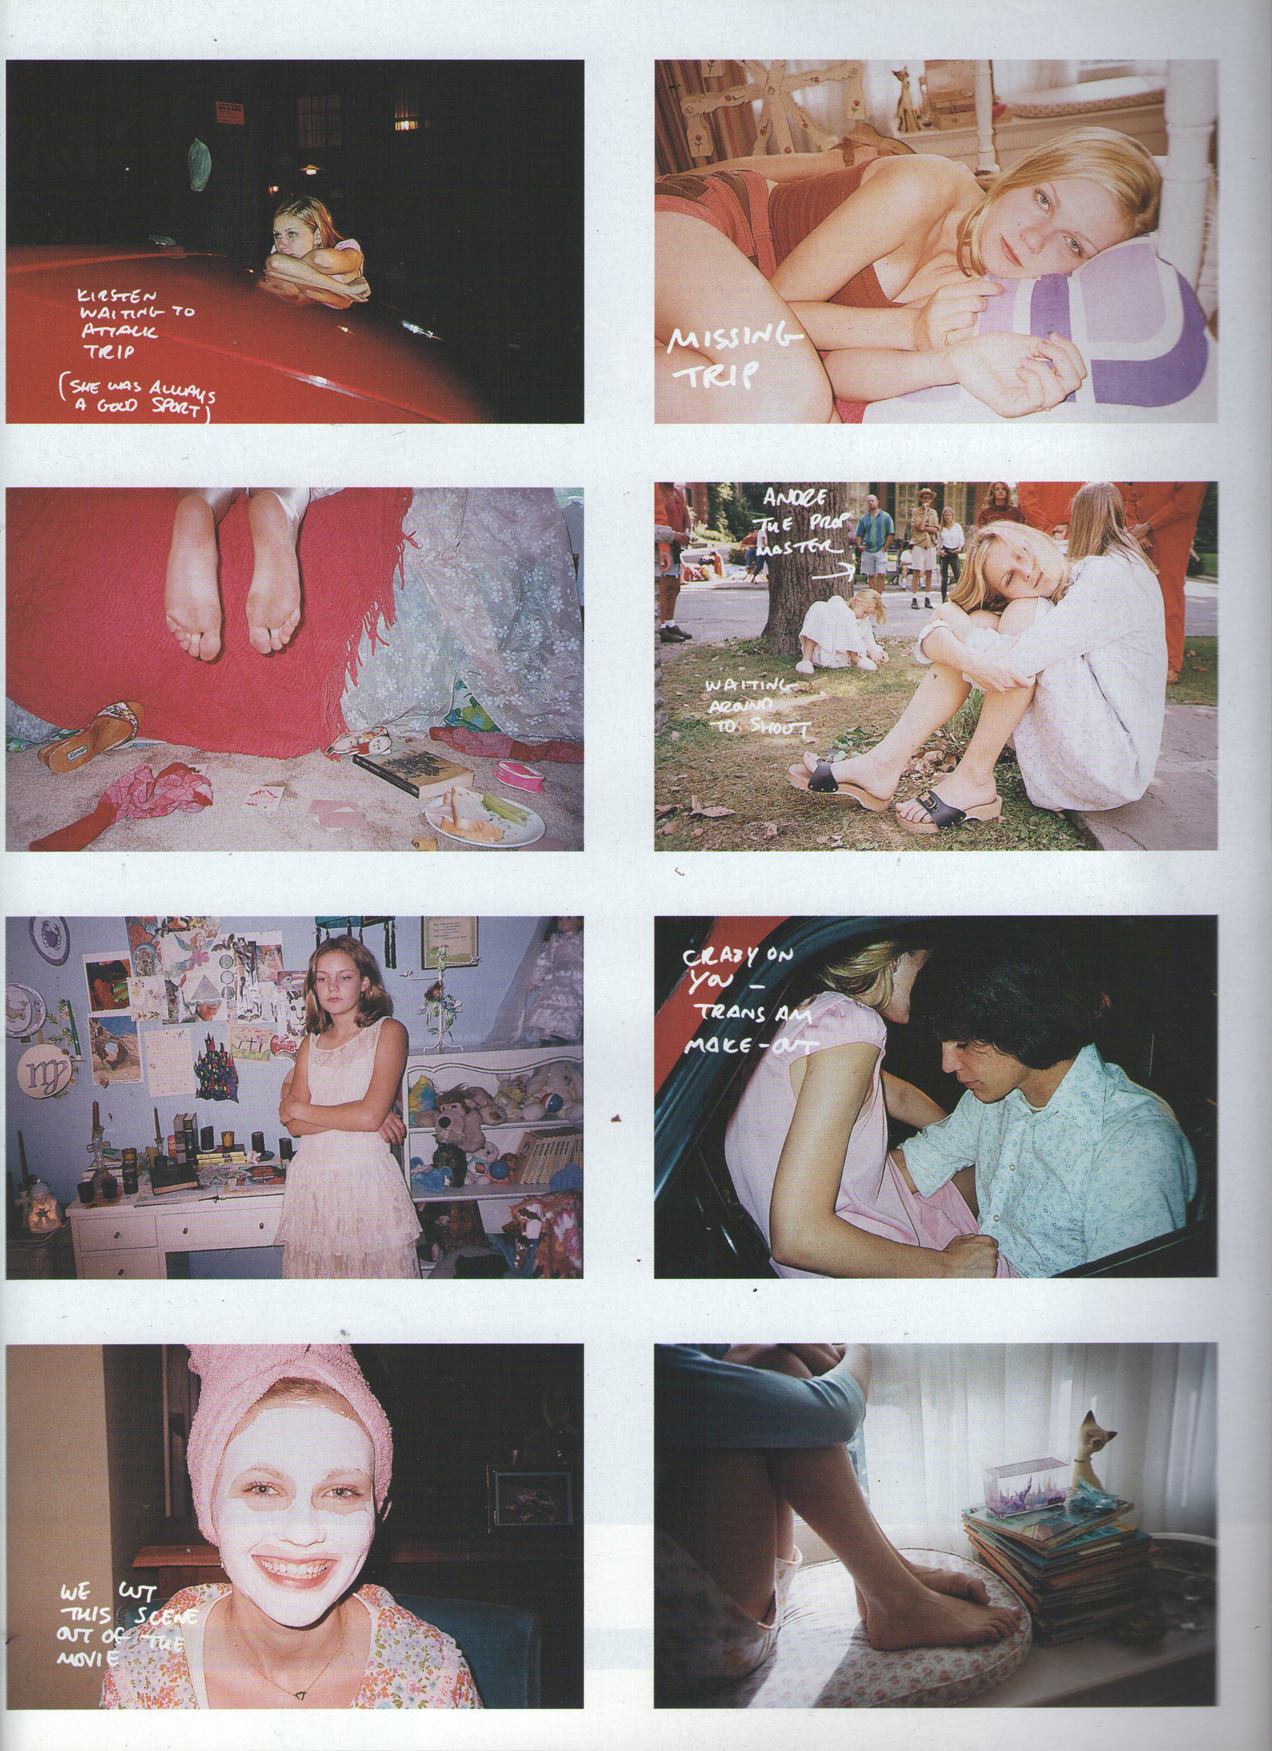 fabricacionesirreales:bandtshirt: Do You Remember The First Time? Shot by Sofia Coppola